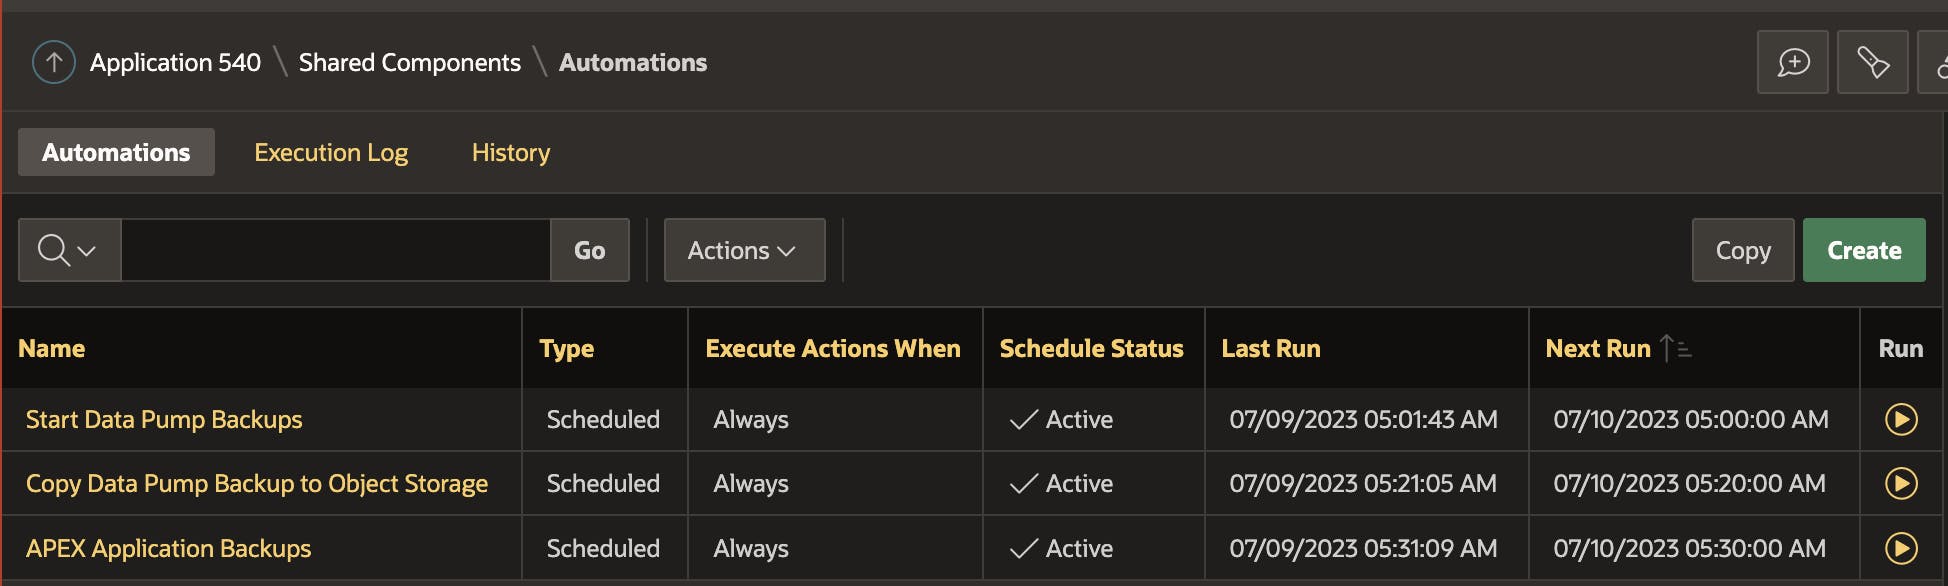 Scheduled APEX Autoomations